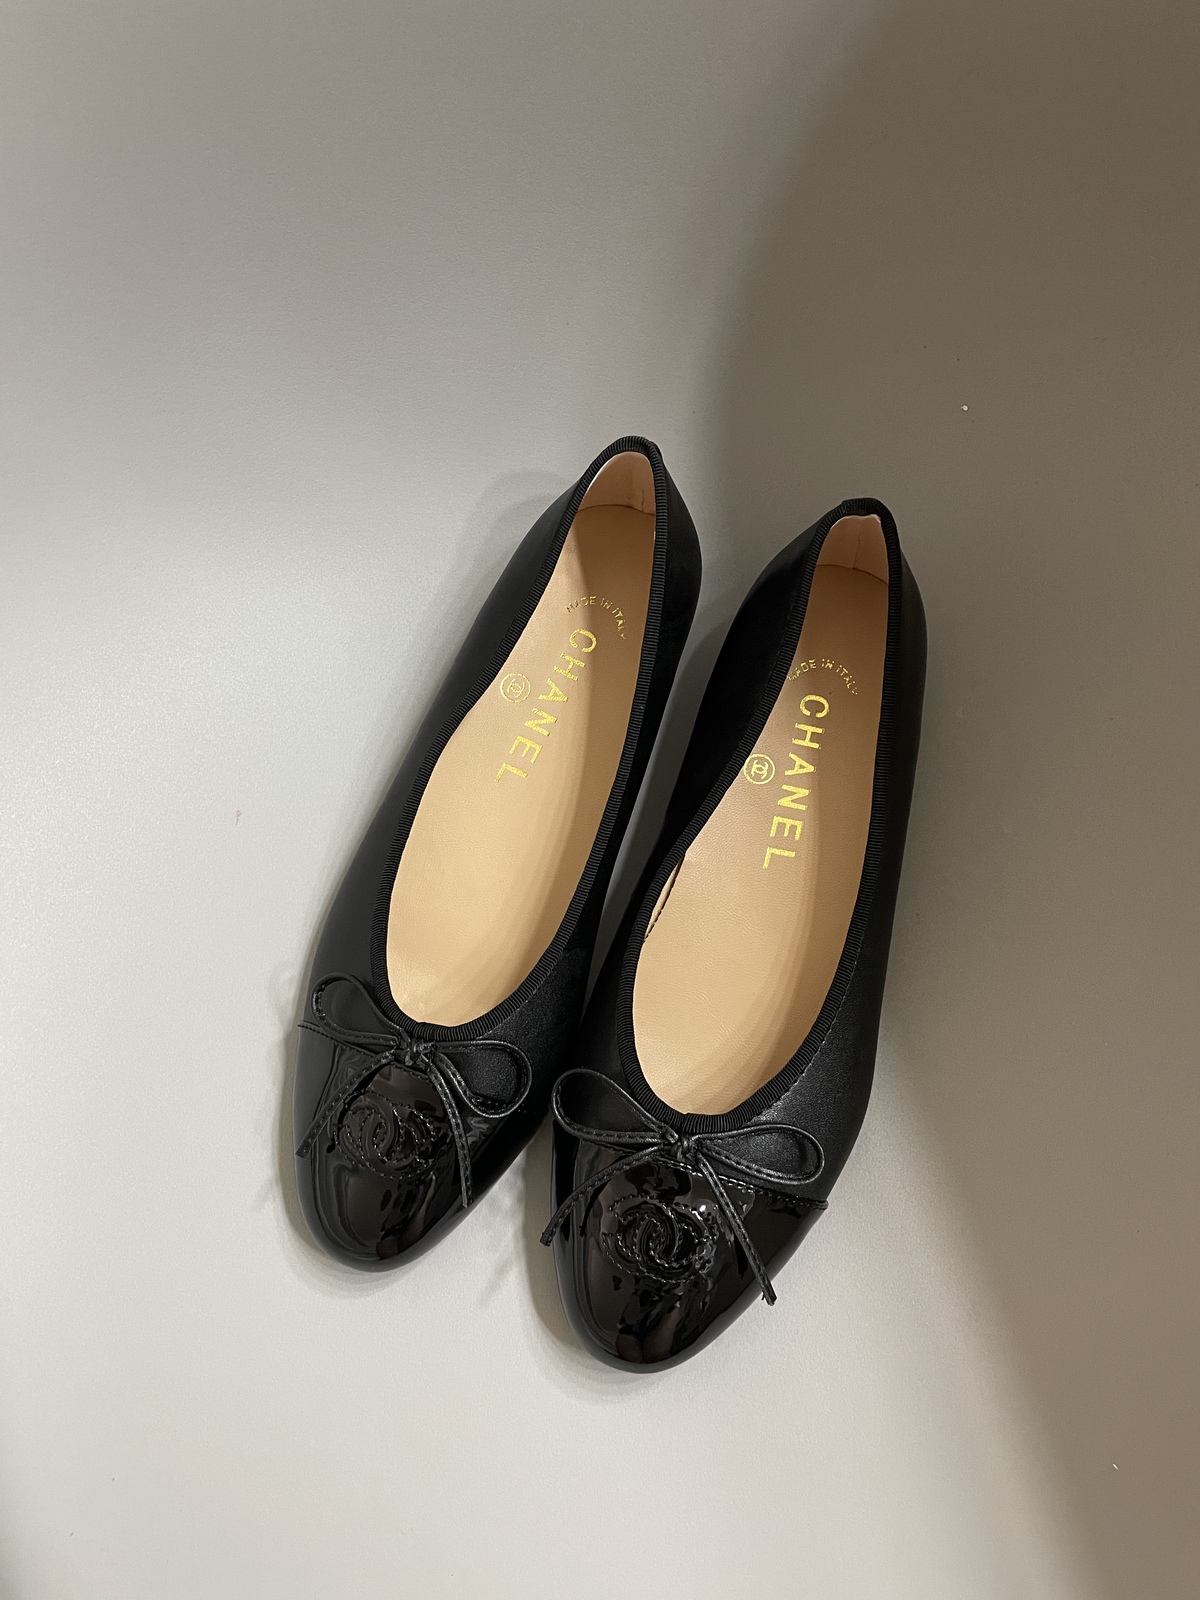 Chanel Ballet Flats Size 37/ US Size 6 and 50 similar items